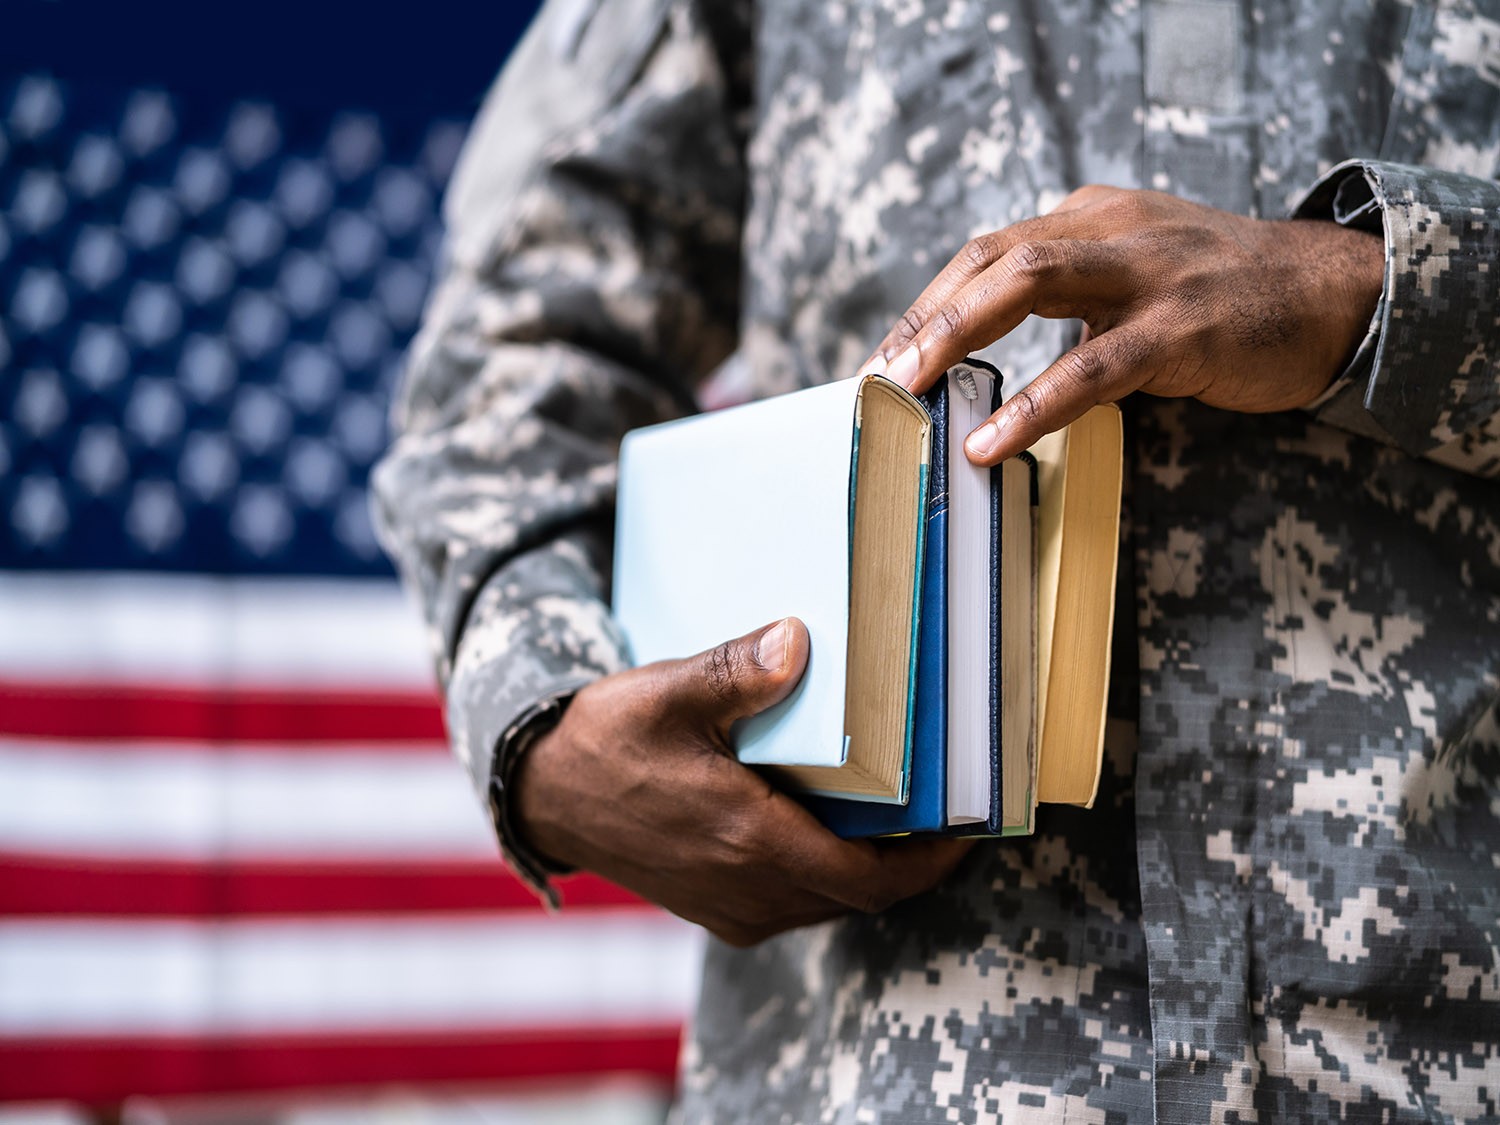 Serviceman holding textbooks standing in front of American flag.